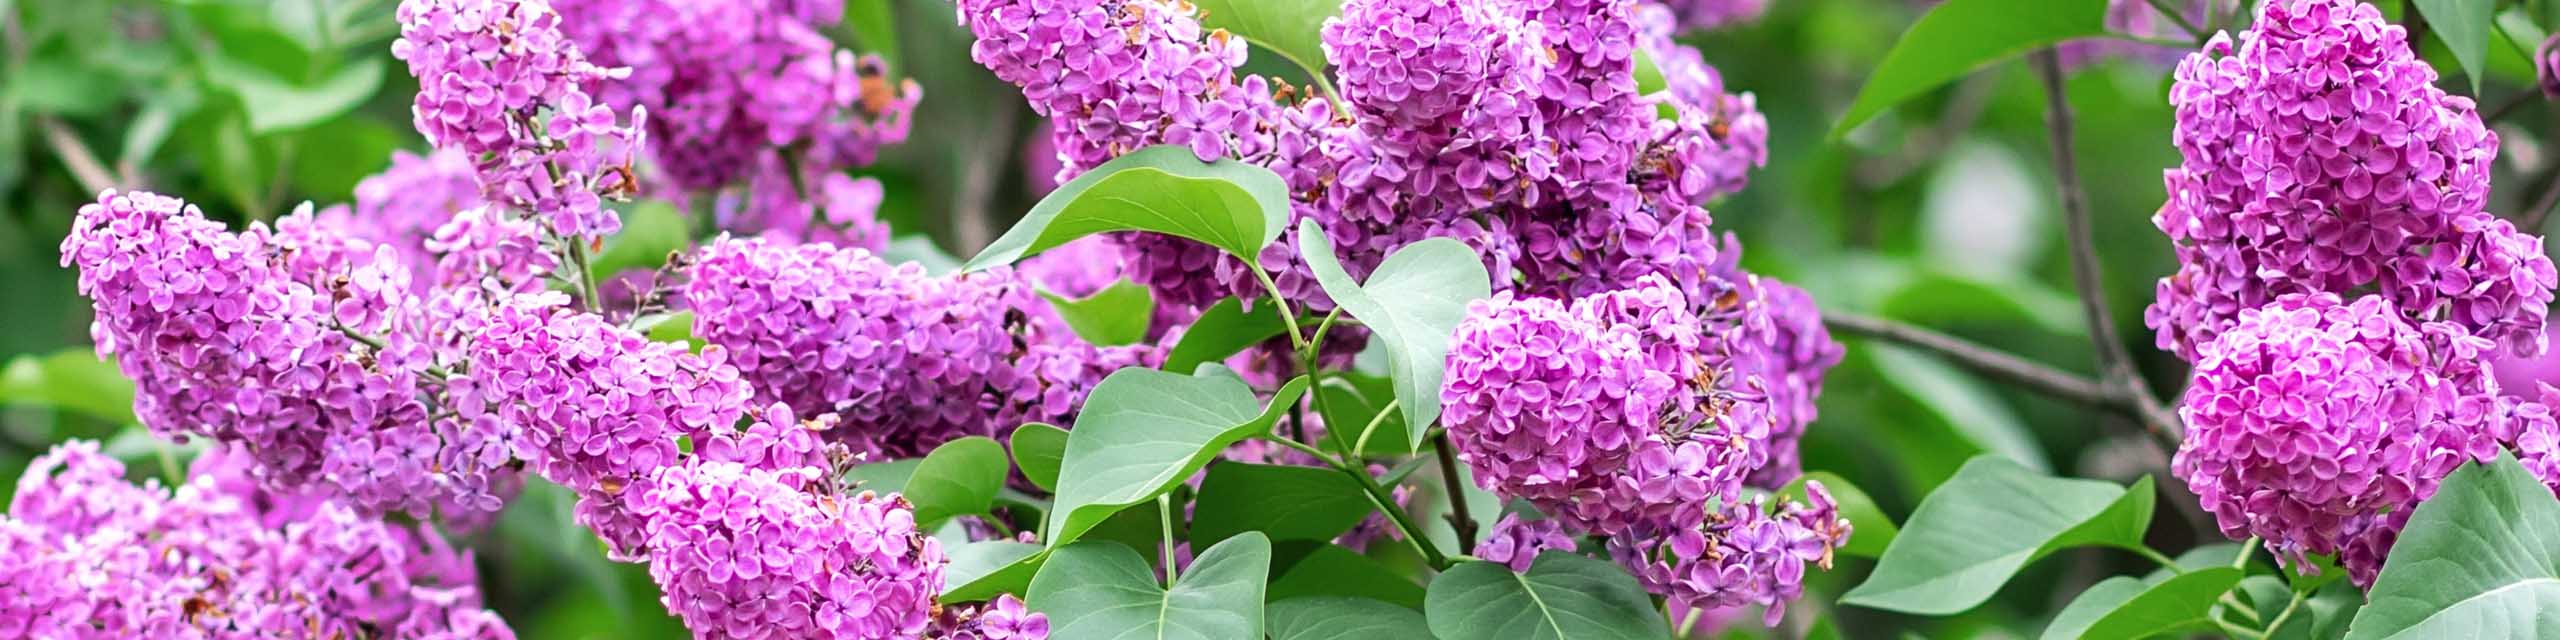 Lilac flowers blooming on a bush.